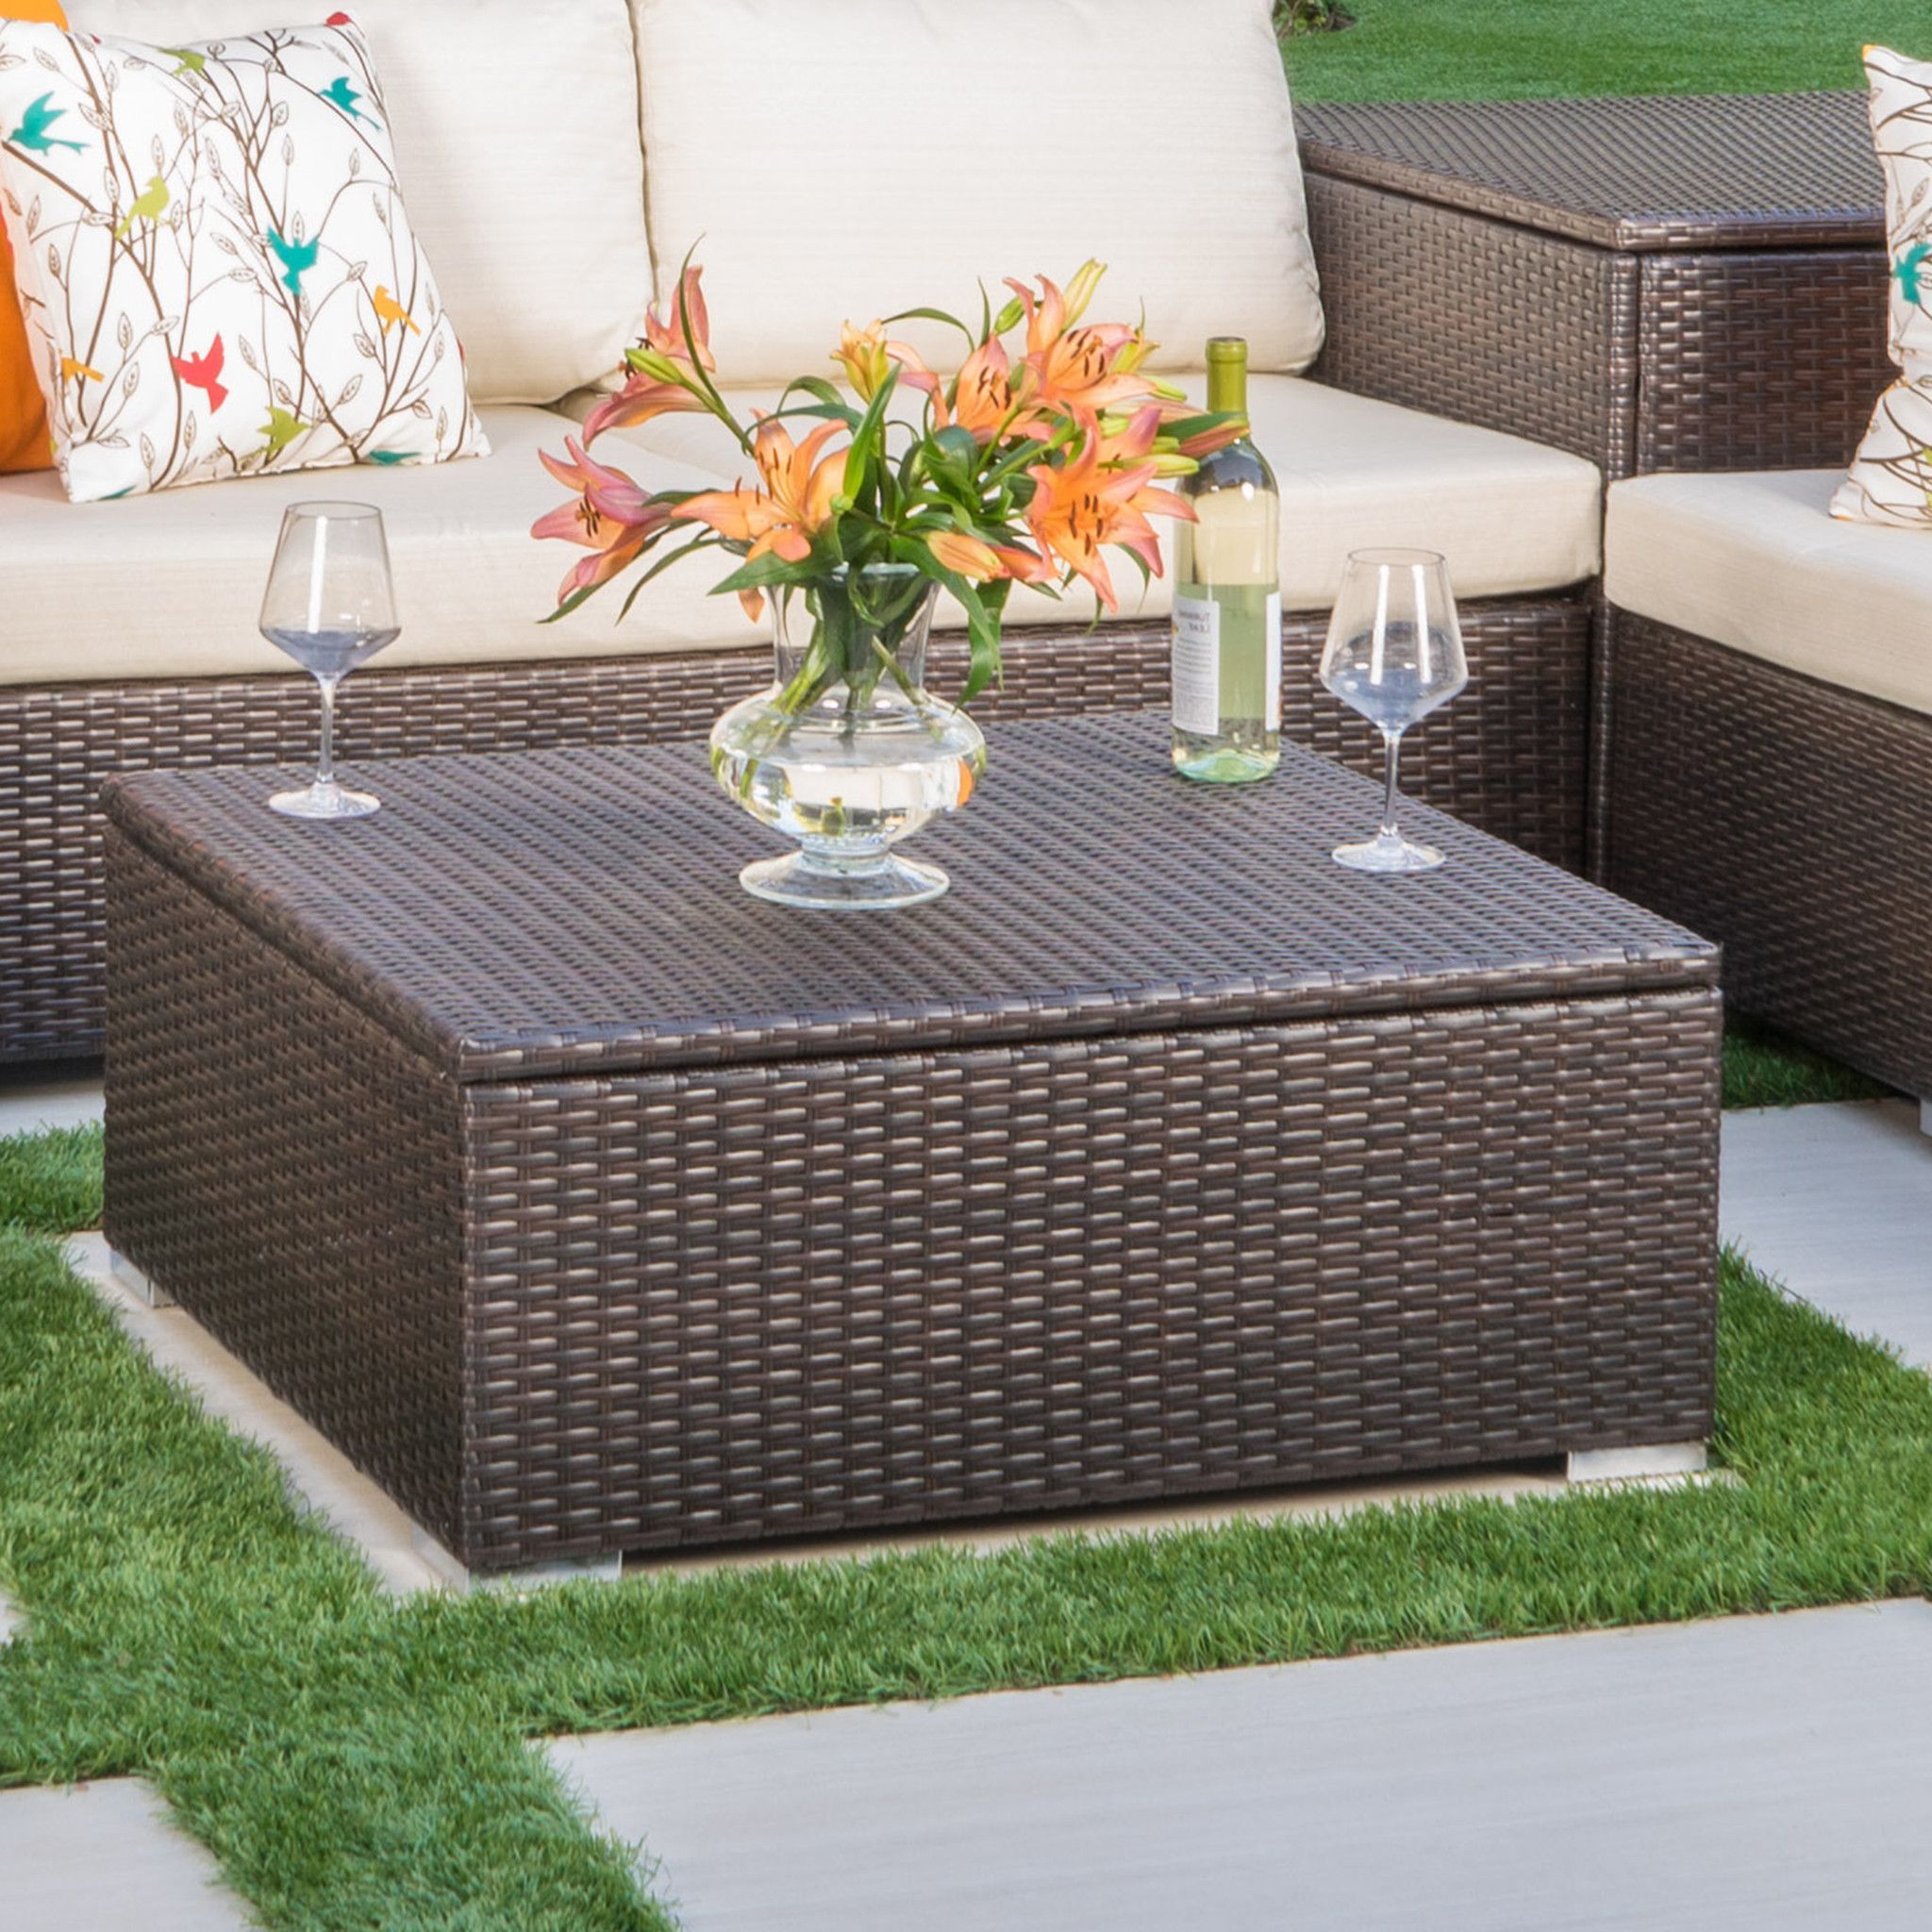 San Louis Obispo Outdoor Wicker Storage Coffee Table Coffee Table Cover Throughout Waterproof Coffee Tables (View 7 of 20)